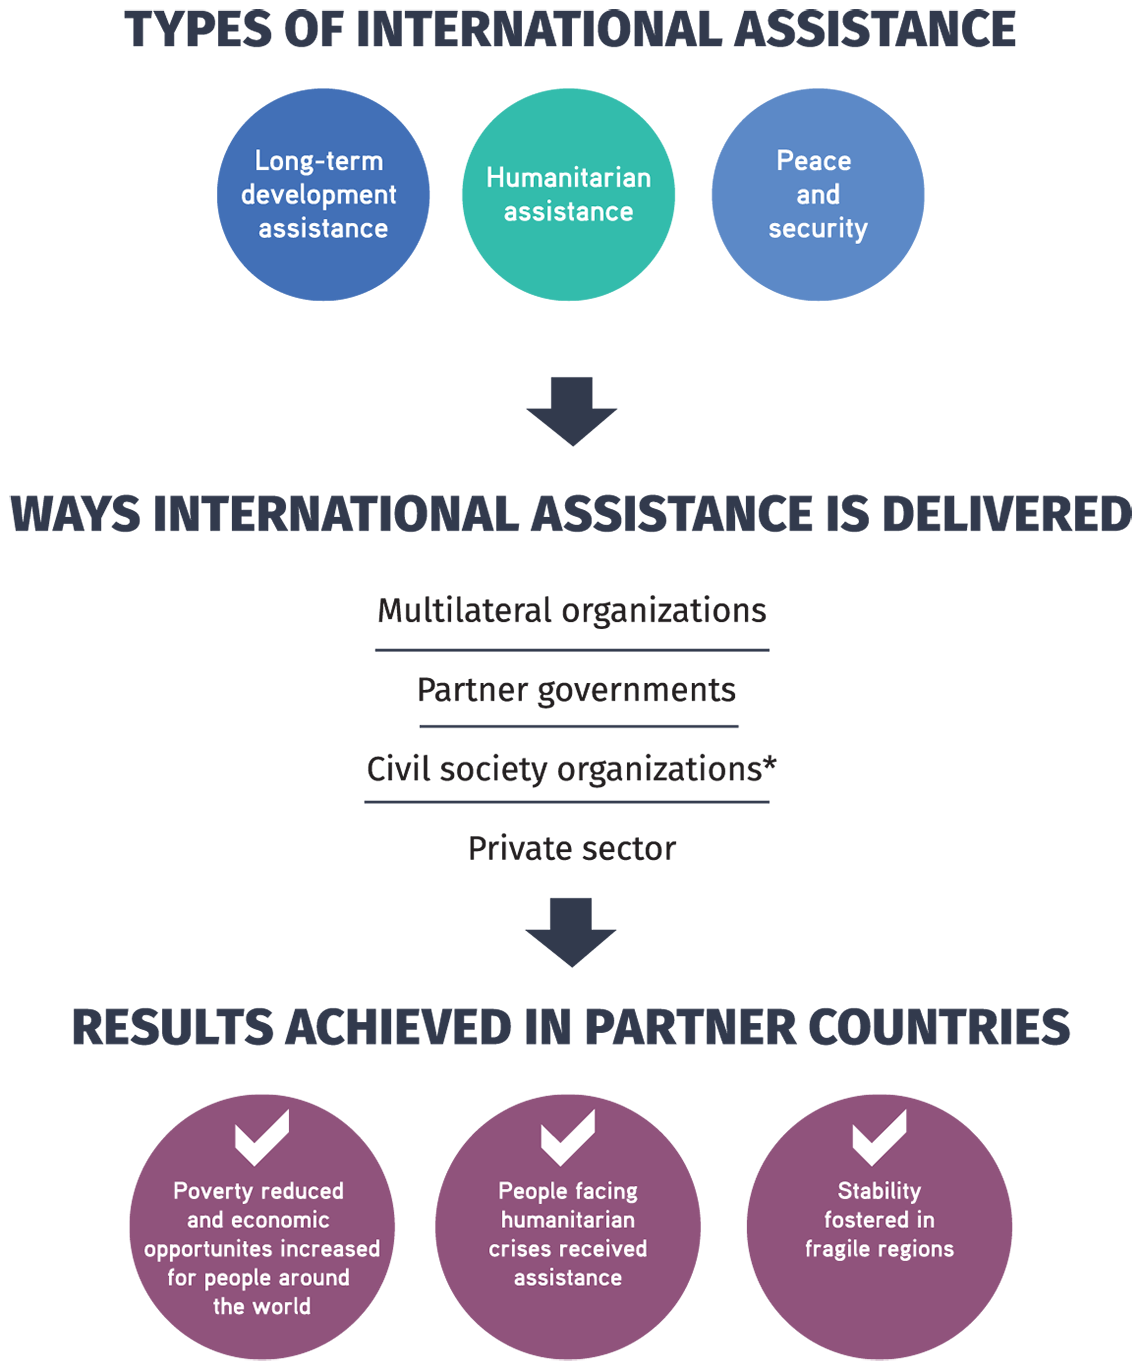 The Government of Canada’s international assistance funding increased by 7% between 2017-2018 and 2018-2019